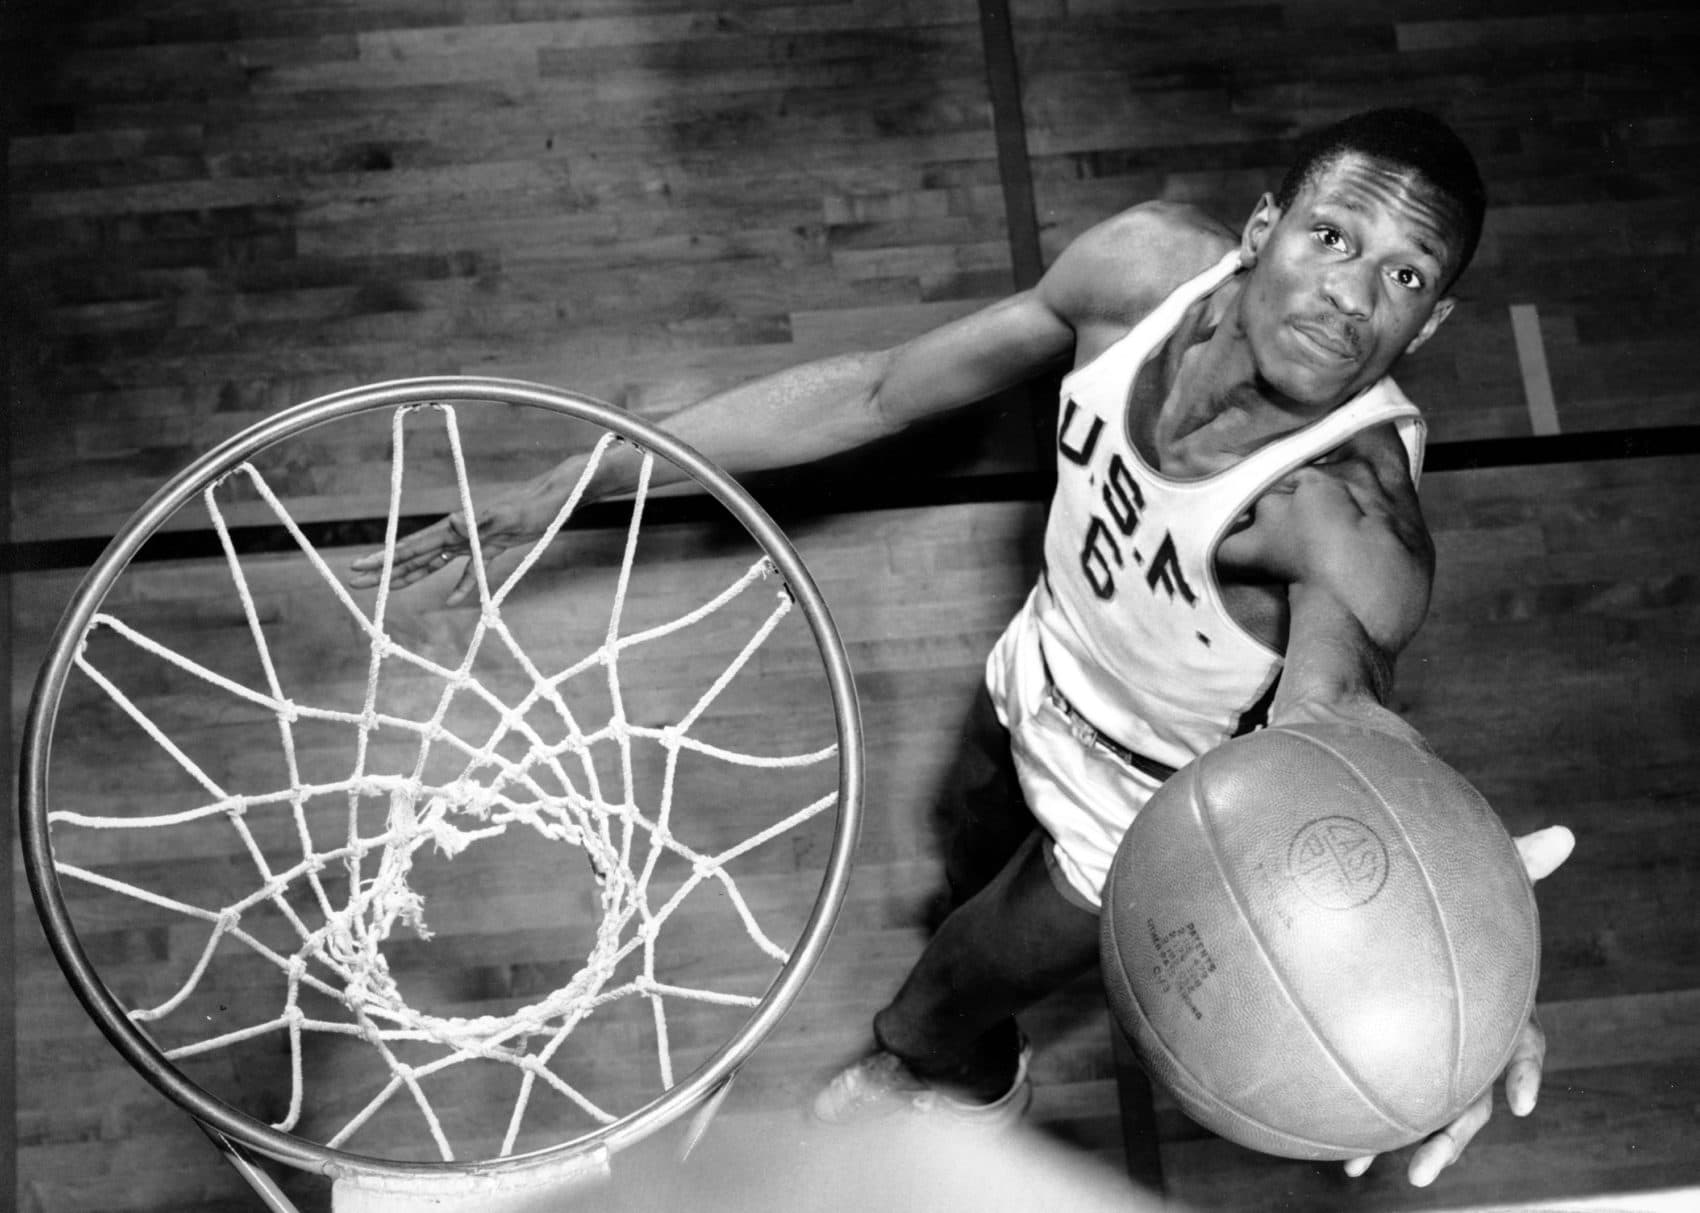 In this Feb. 23, 1956 photo, Bill Russell, a member of the University of San Francisco basketball team, shows how he scores baskets. (AP)